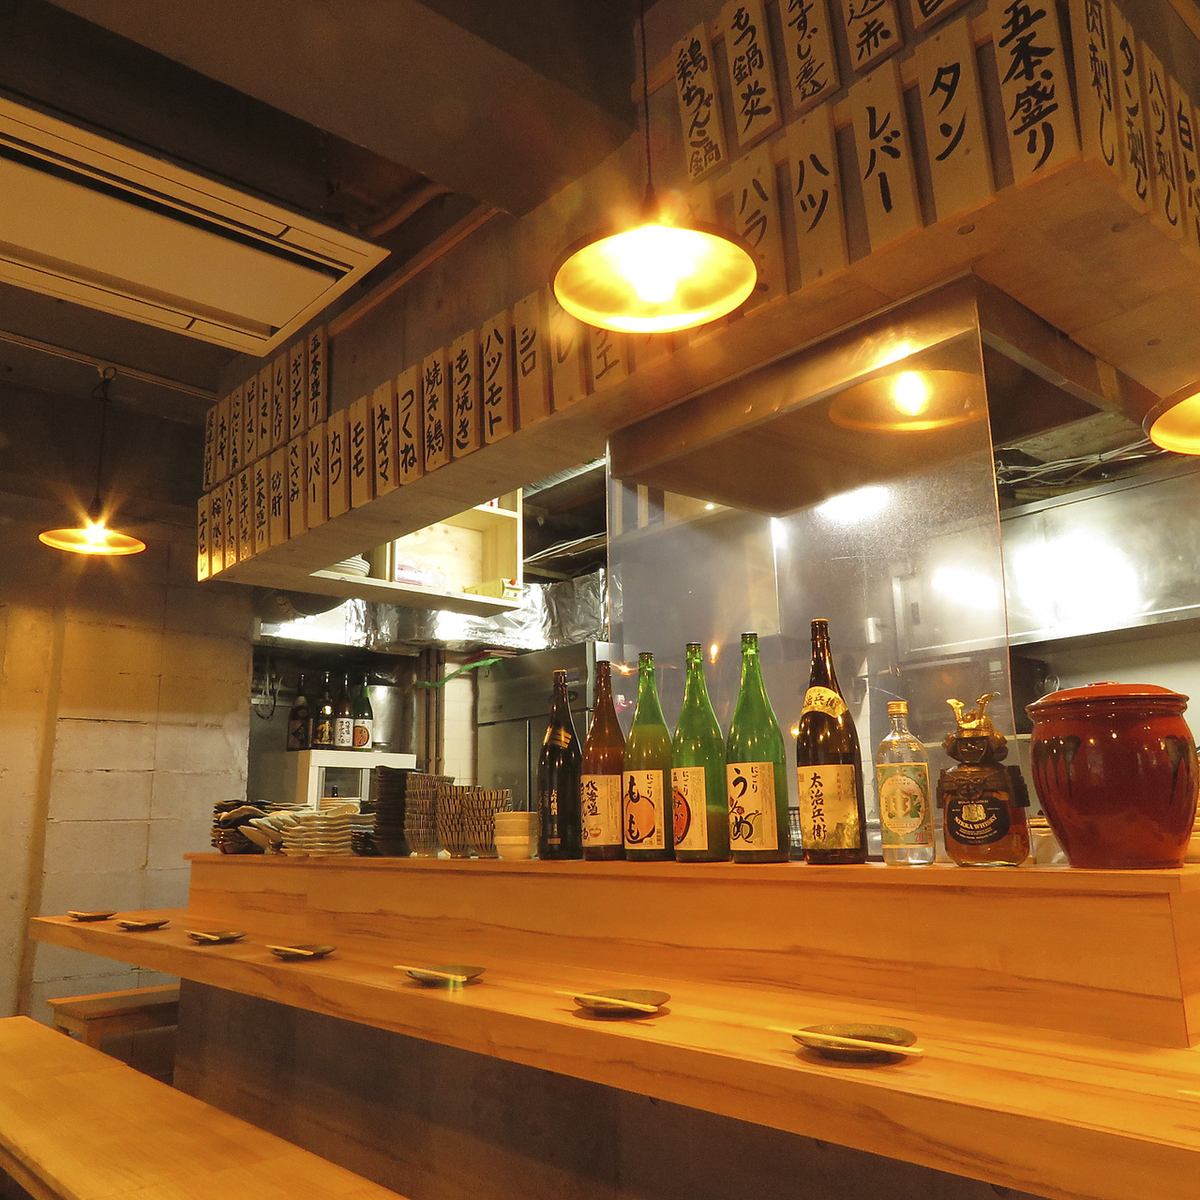 Opened in November! Great location, just a 5-minute walk from Shinjuku Station! Counter seats popular with couples